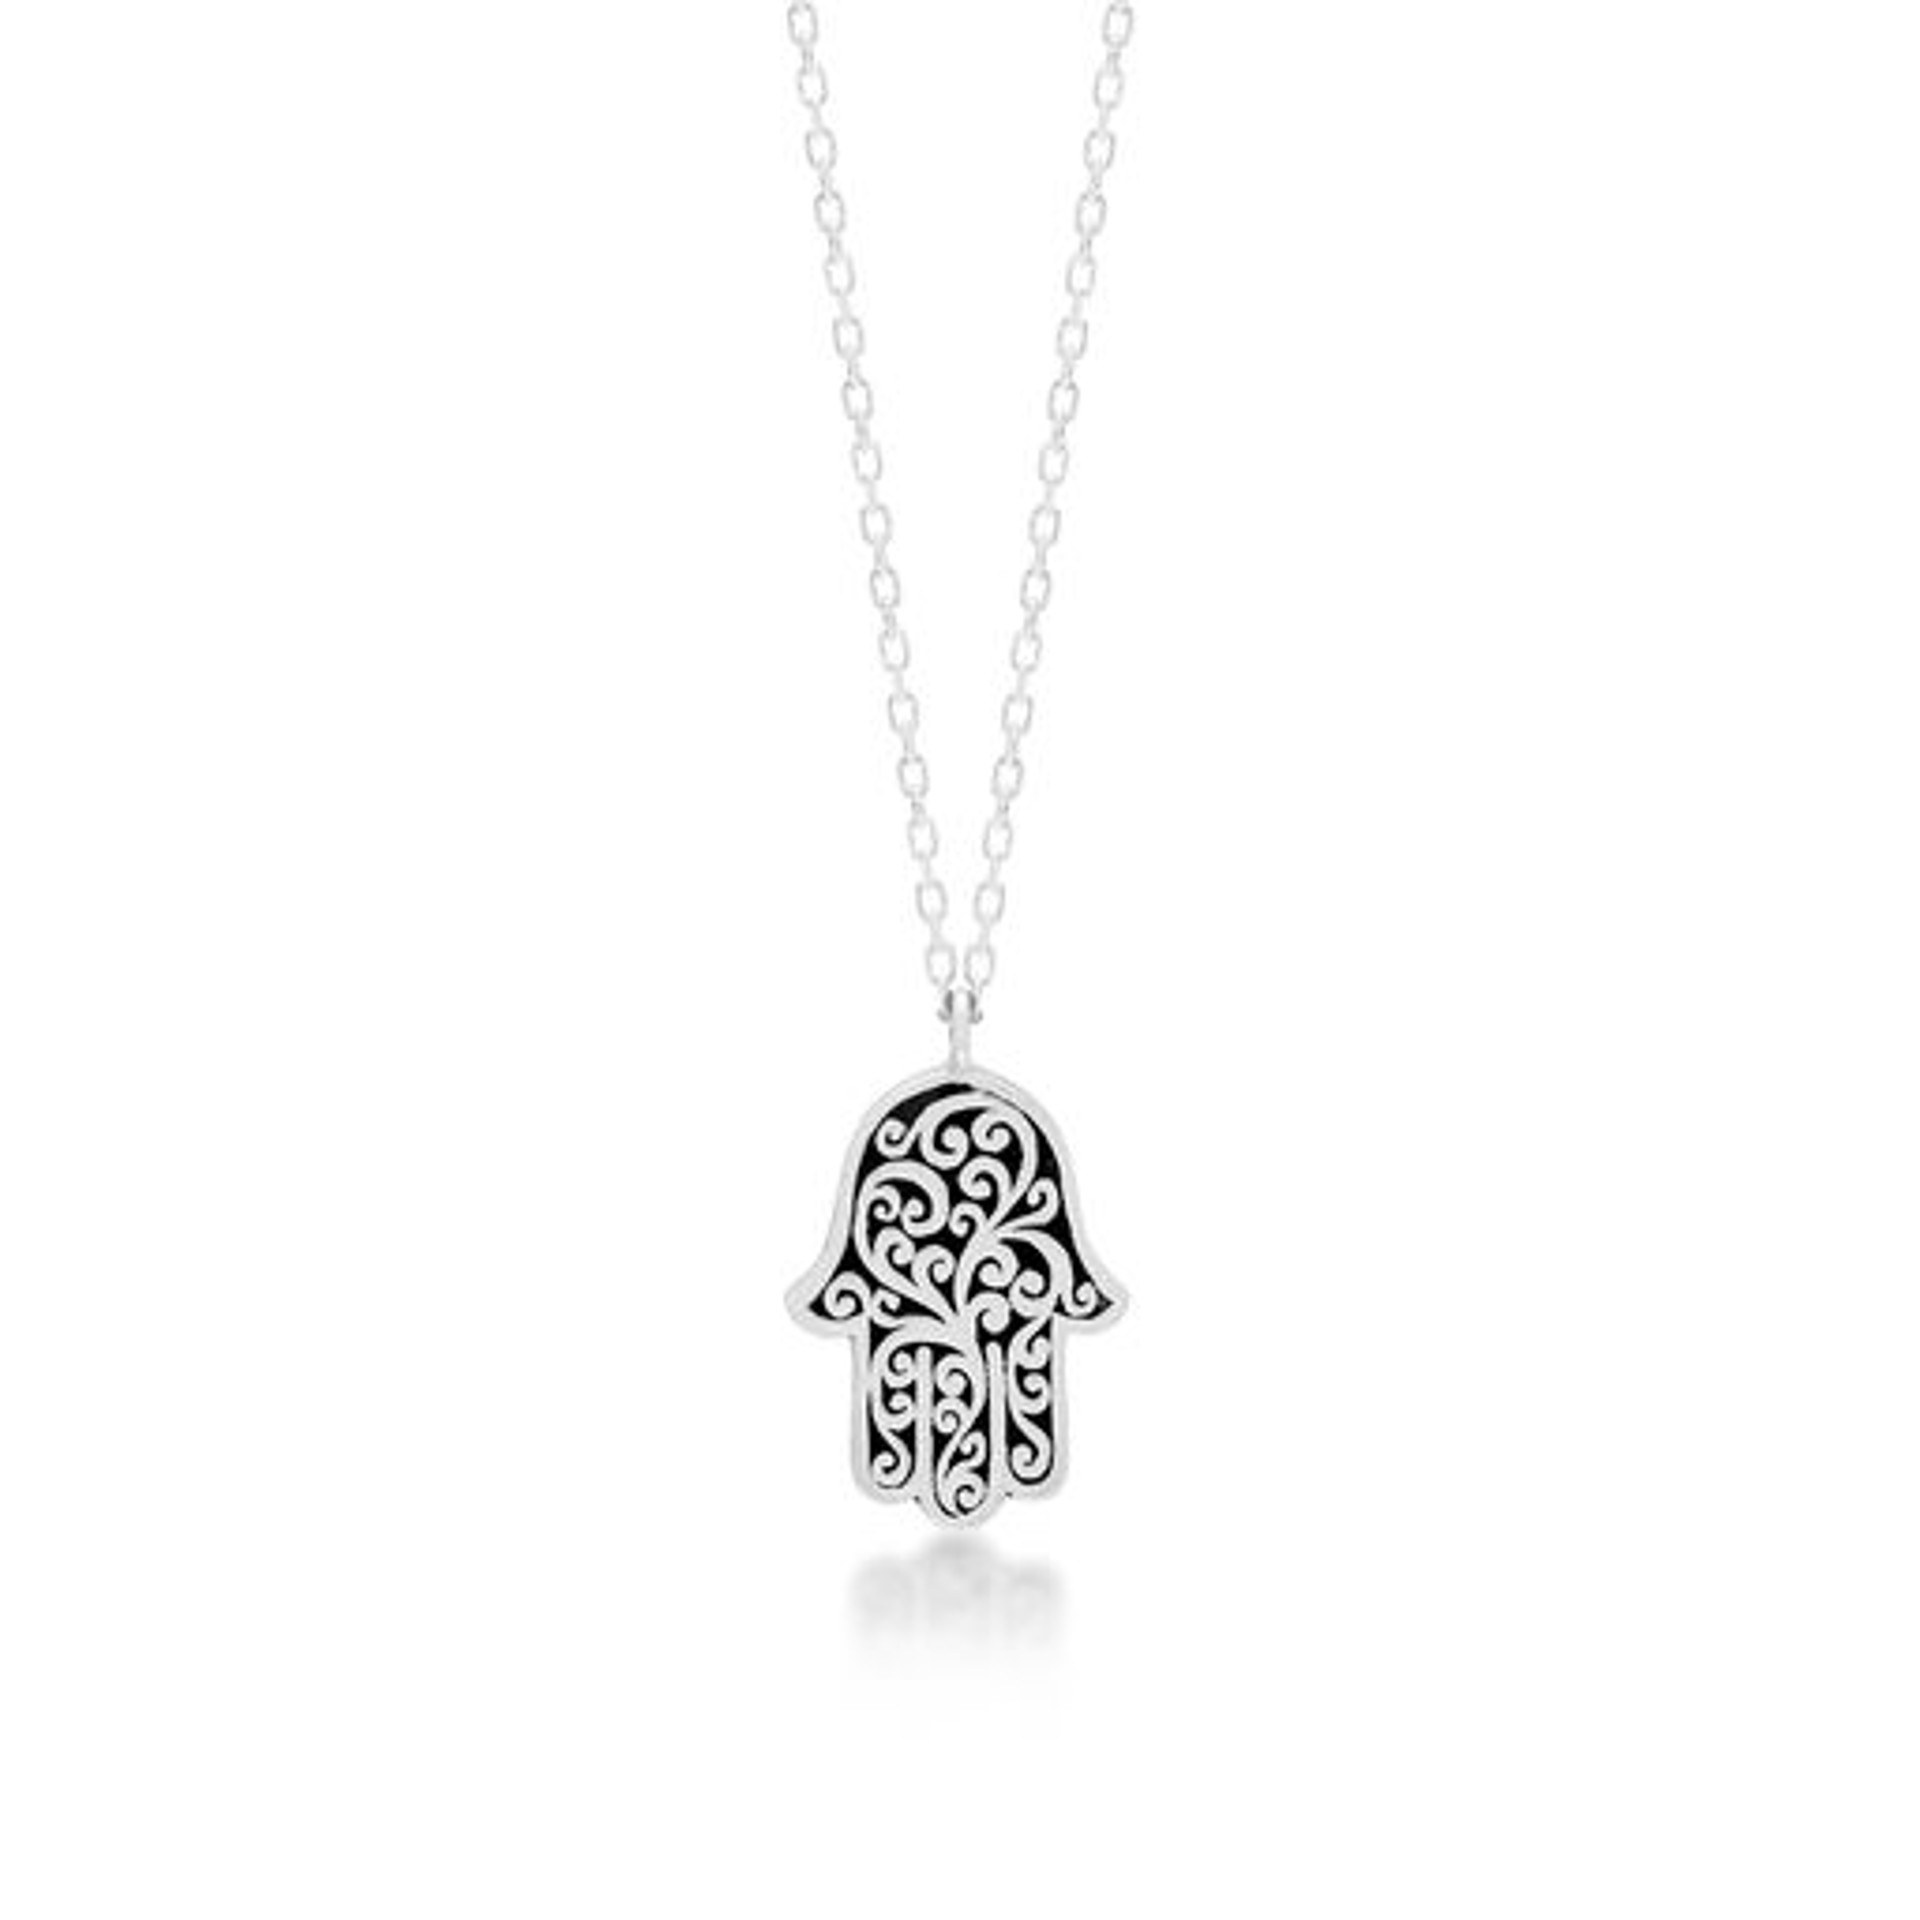 LH Signature Scroll Sterling Silver Delicate Hamsa Pendant Necklace in 18" Adjustable Chain. Pendant size 17x11mm. by Lois Hill